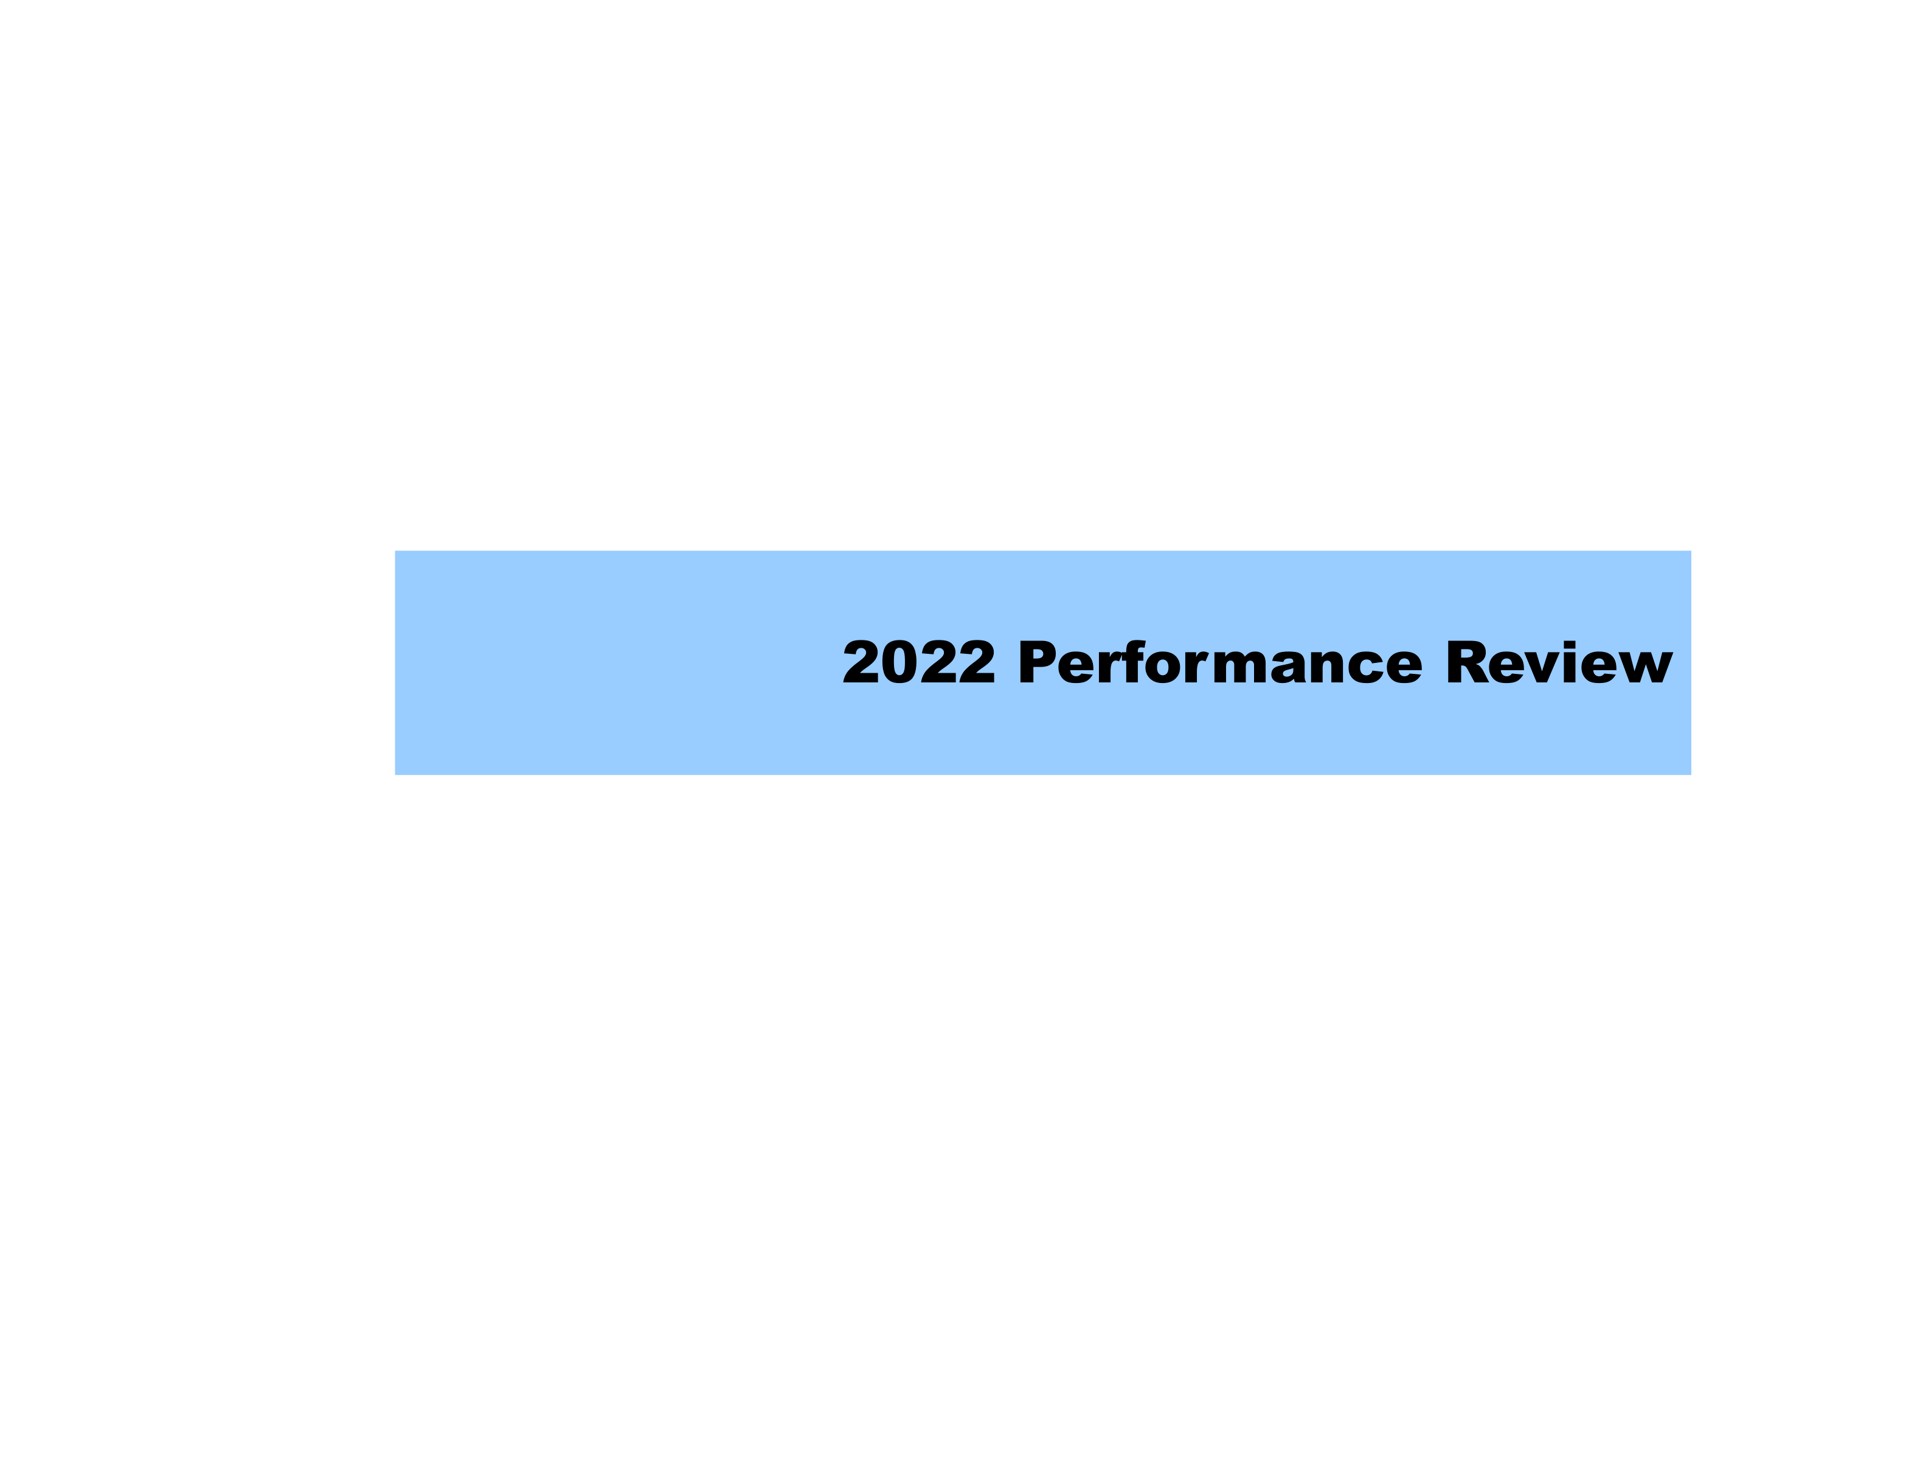 performance review | Pershing Square